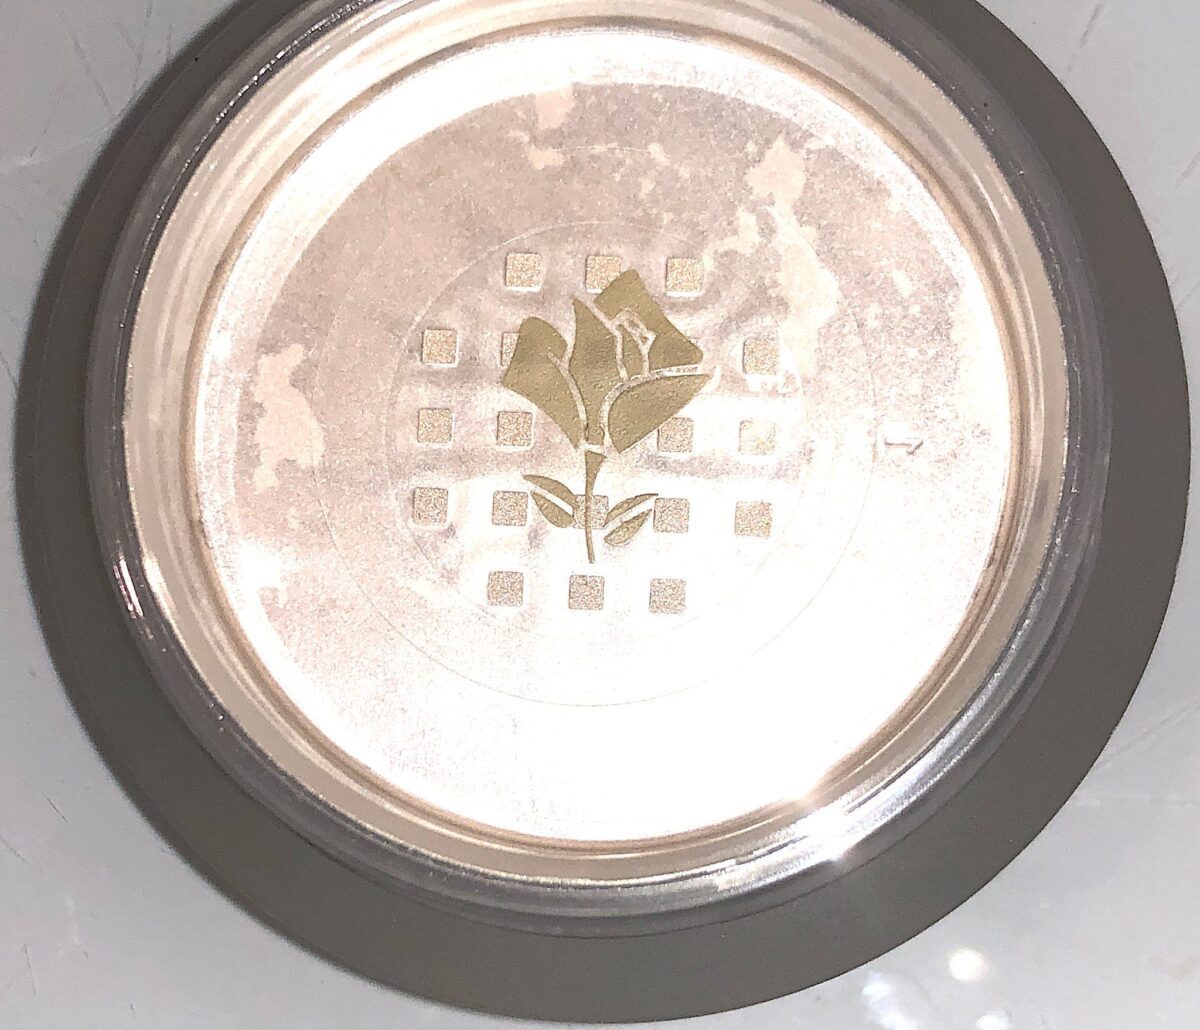 THE SHADE OF THE LANCOME ABSOLUE PECHE POWDER